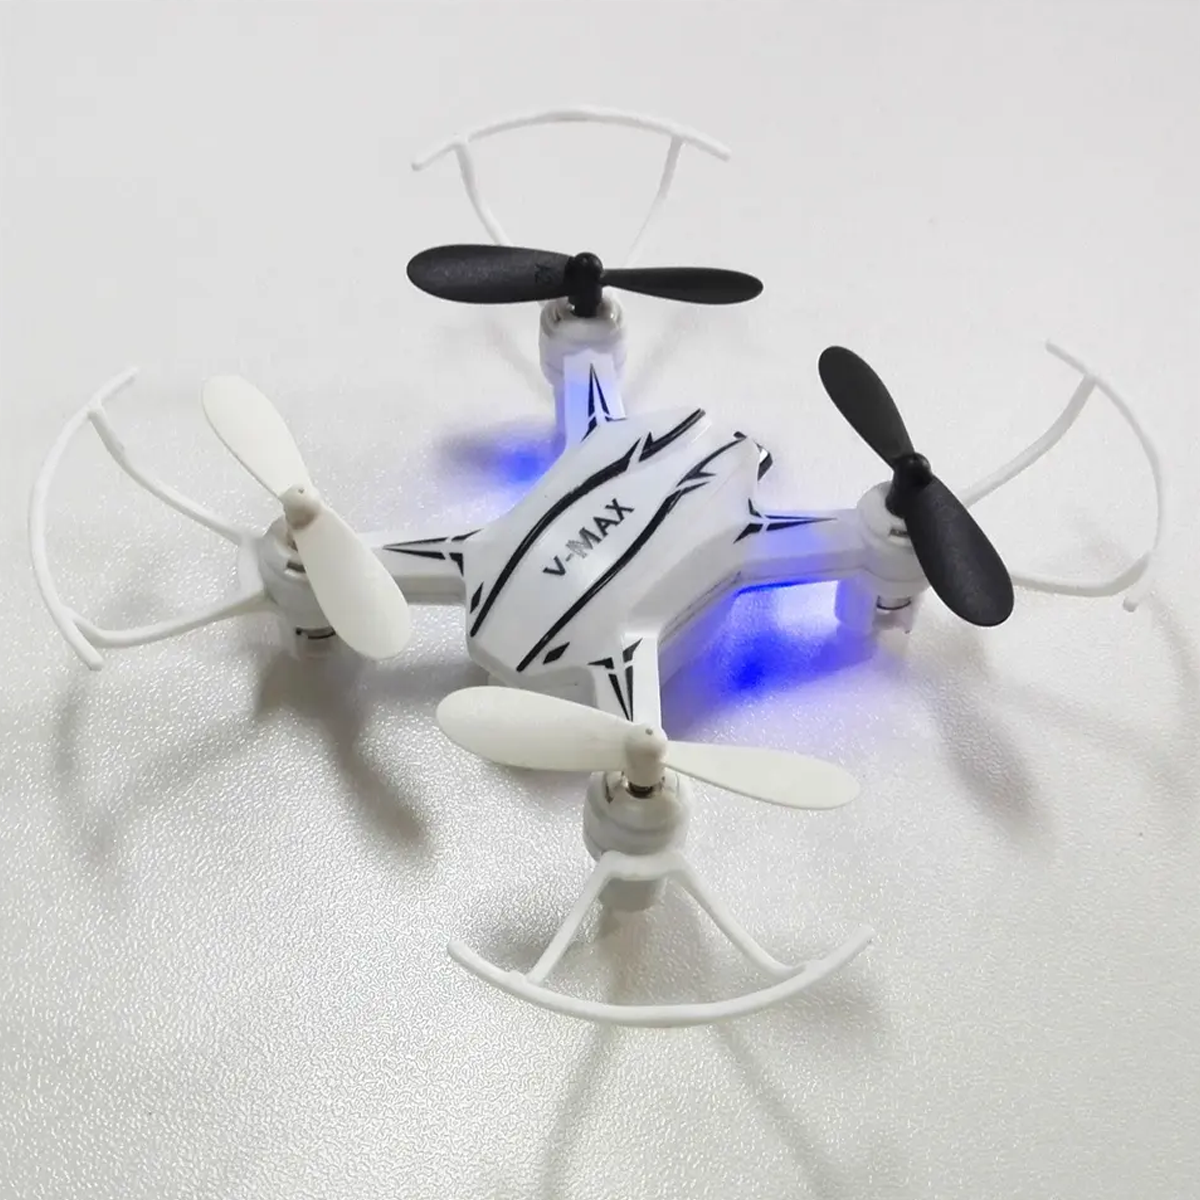 Rechargeable RC Mini Nano Space Quadcopter-2